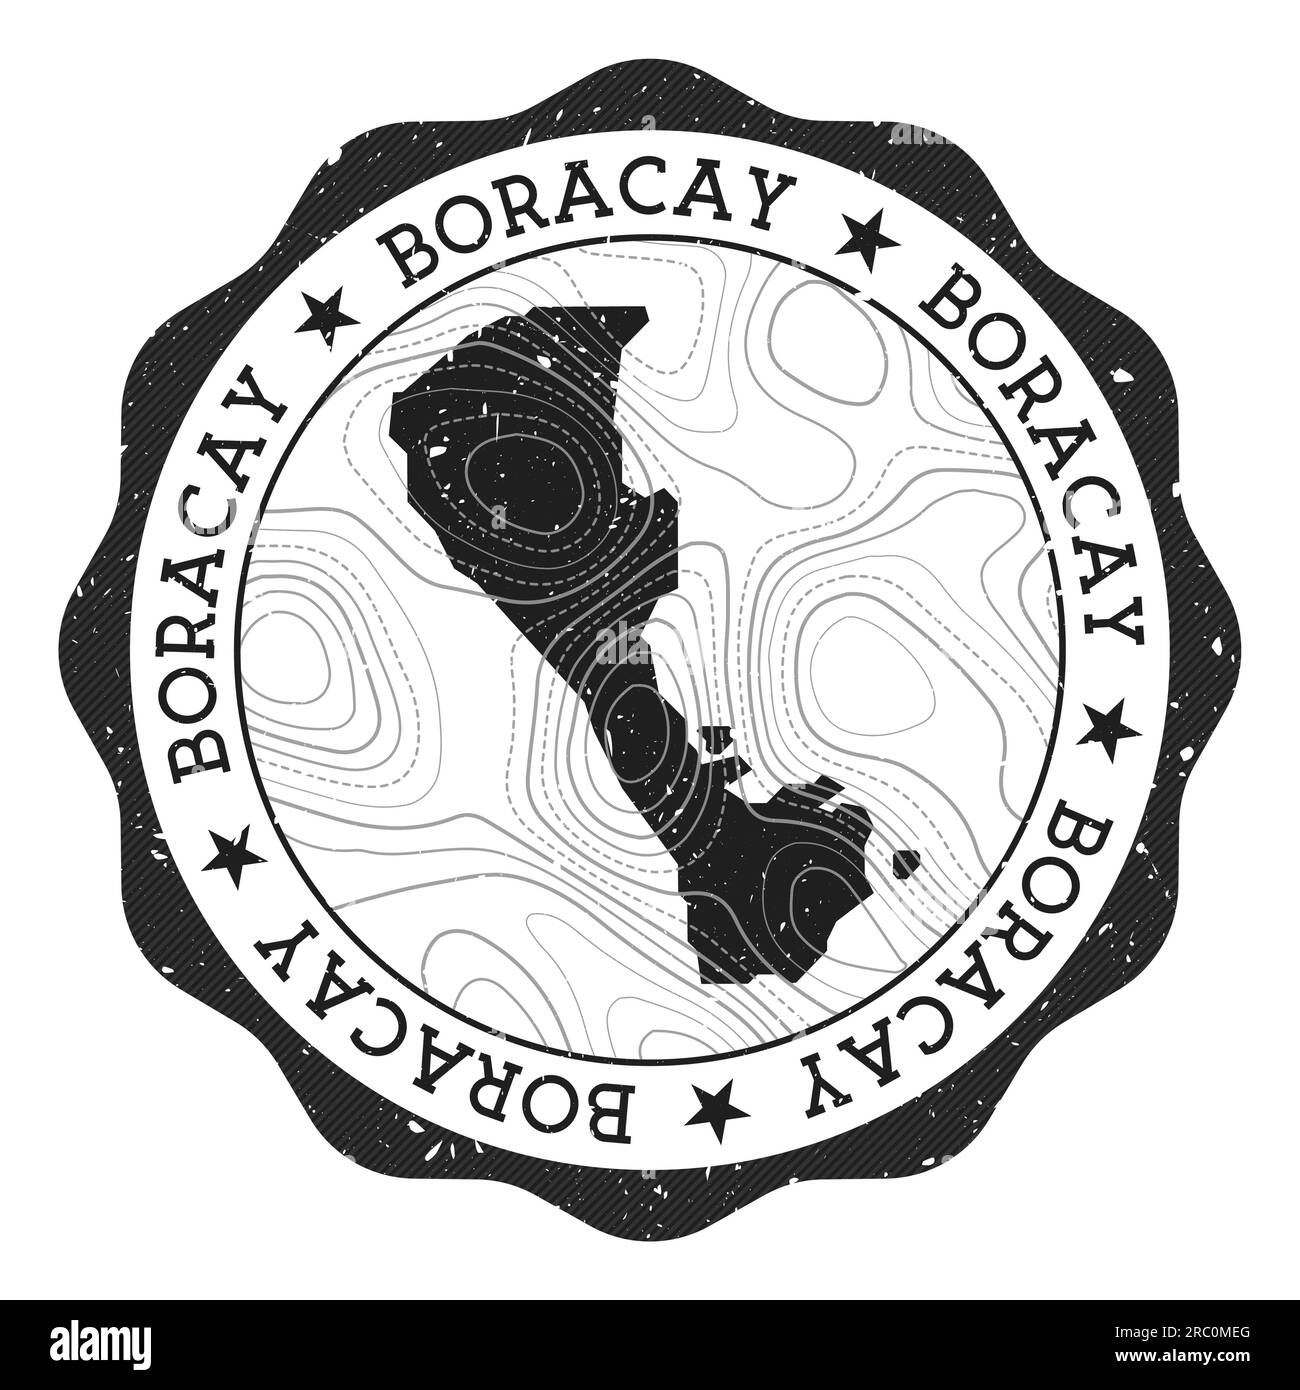 Boracay outdoor stamp. Round sticker with map of island with topographic isolines. Vector illustration. Can be used as insignia, logotype, label, stic Stock Vector